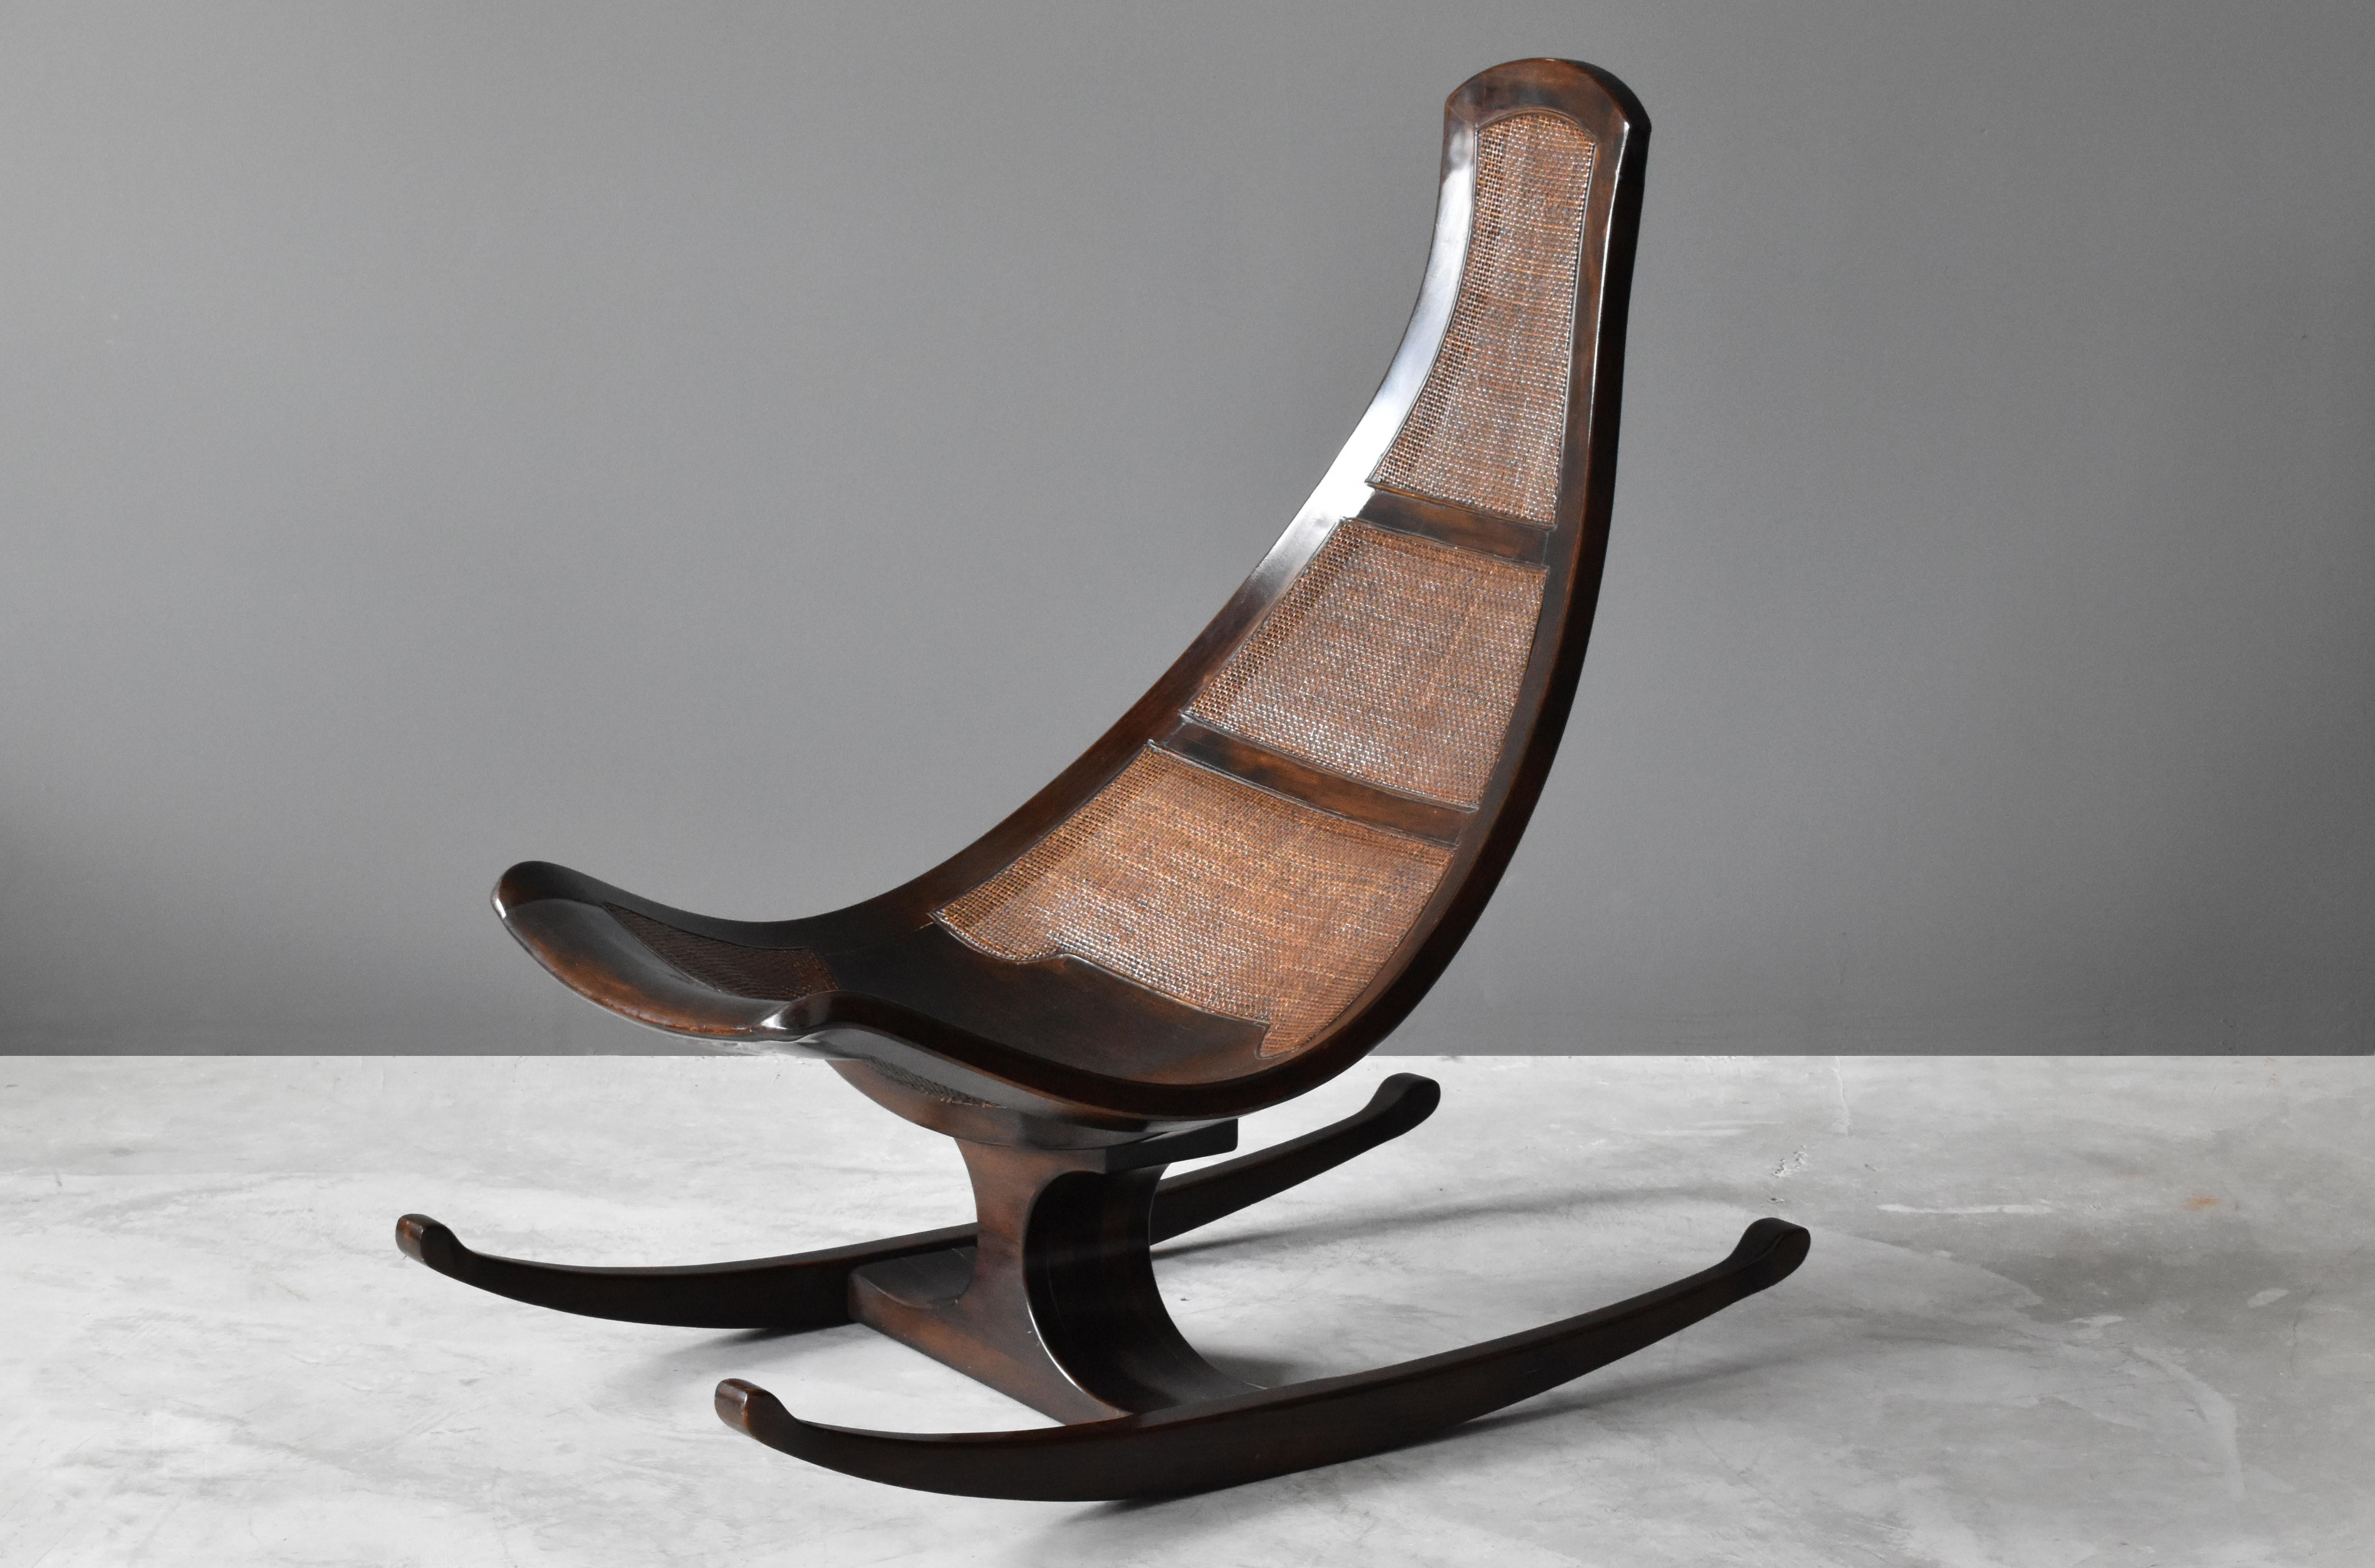 A highly modern and organic rocking lounge chair by an unknown modernist designer. Finely carved mahogany is paired with cane panels. Produced in Brazil, circa 1970s.

Other Brazilian designers include: Joaquim Tenreiro, Sergio Rodrigues, Zanine